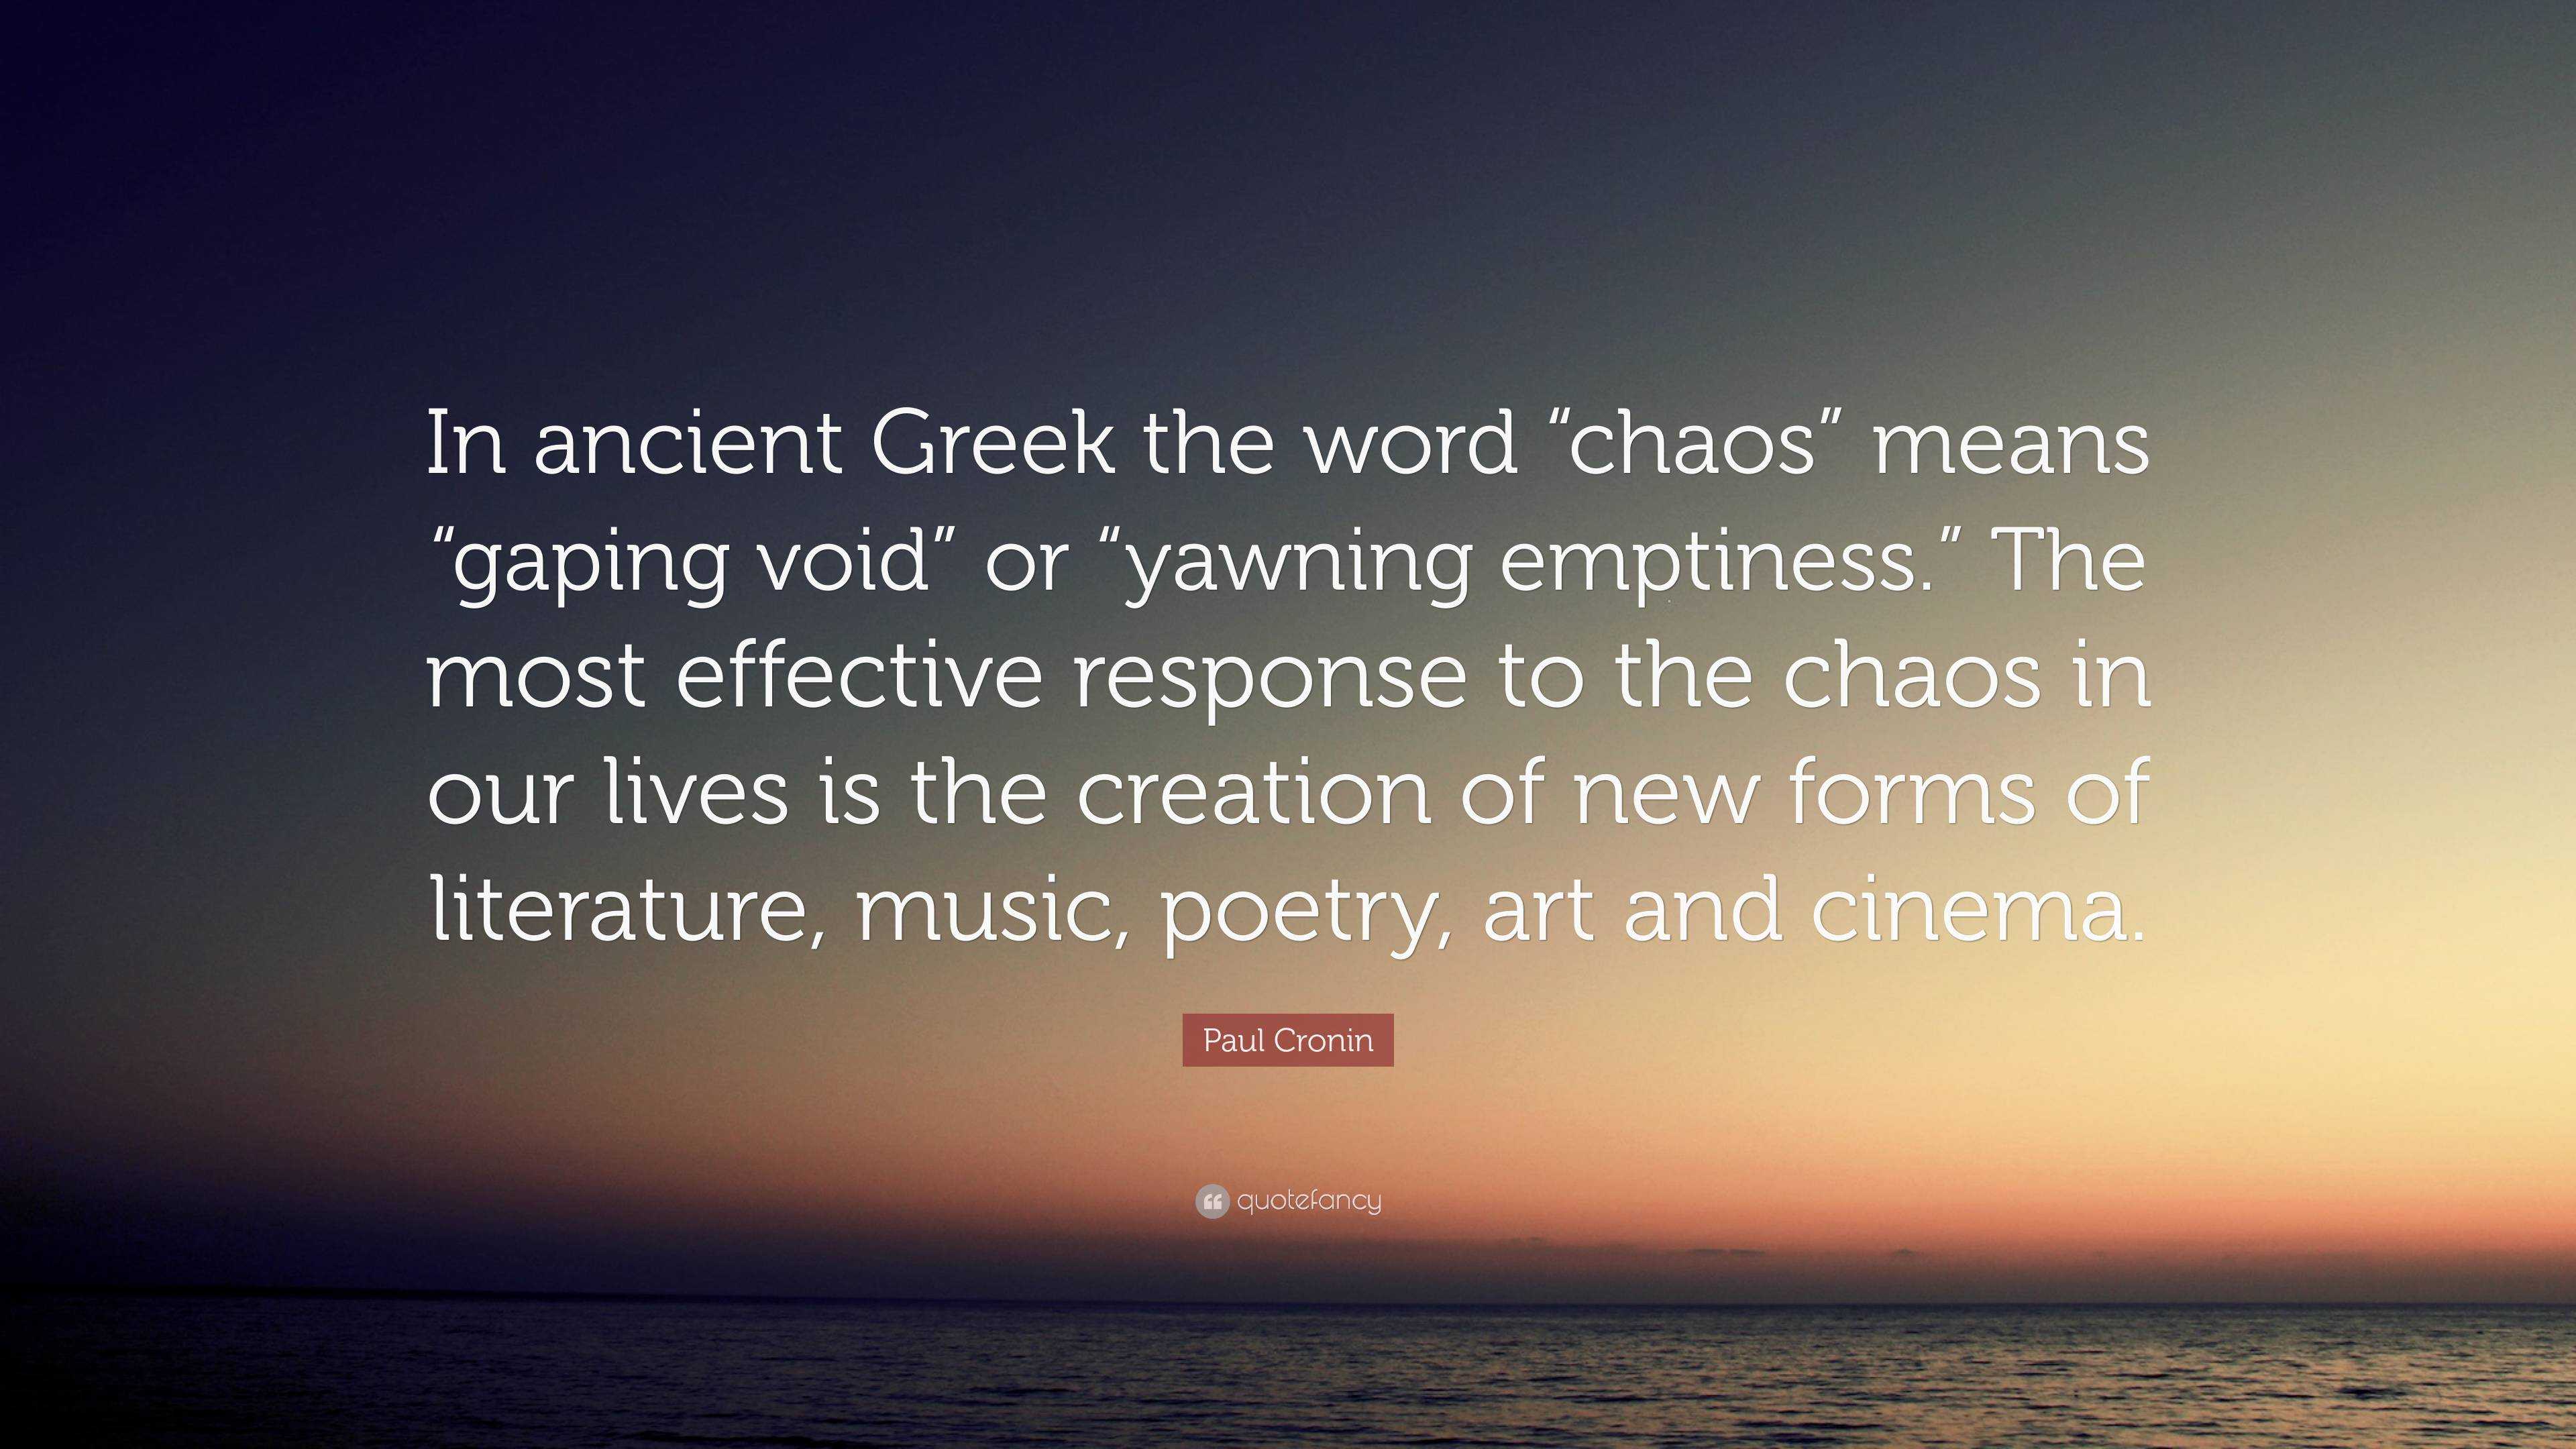 Paul Cronin Quote: “In ancient Greek the word “chaos” means